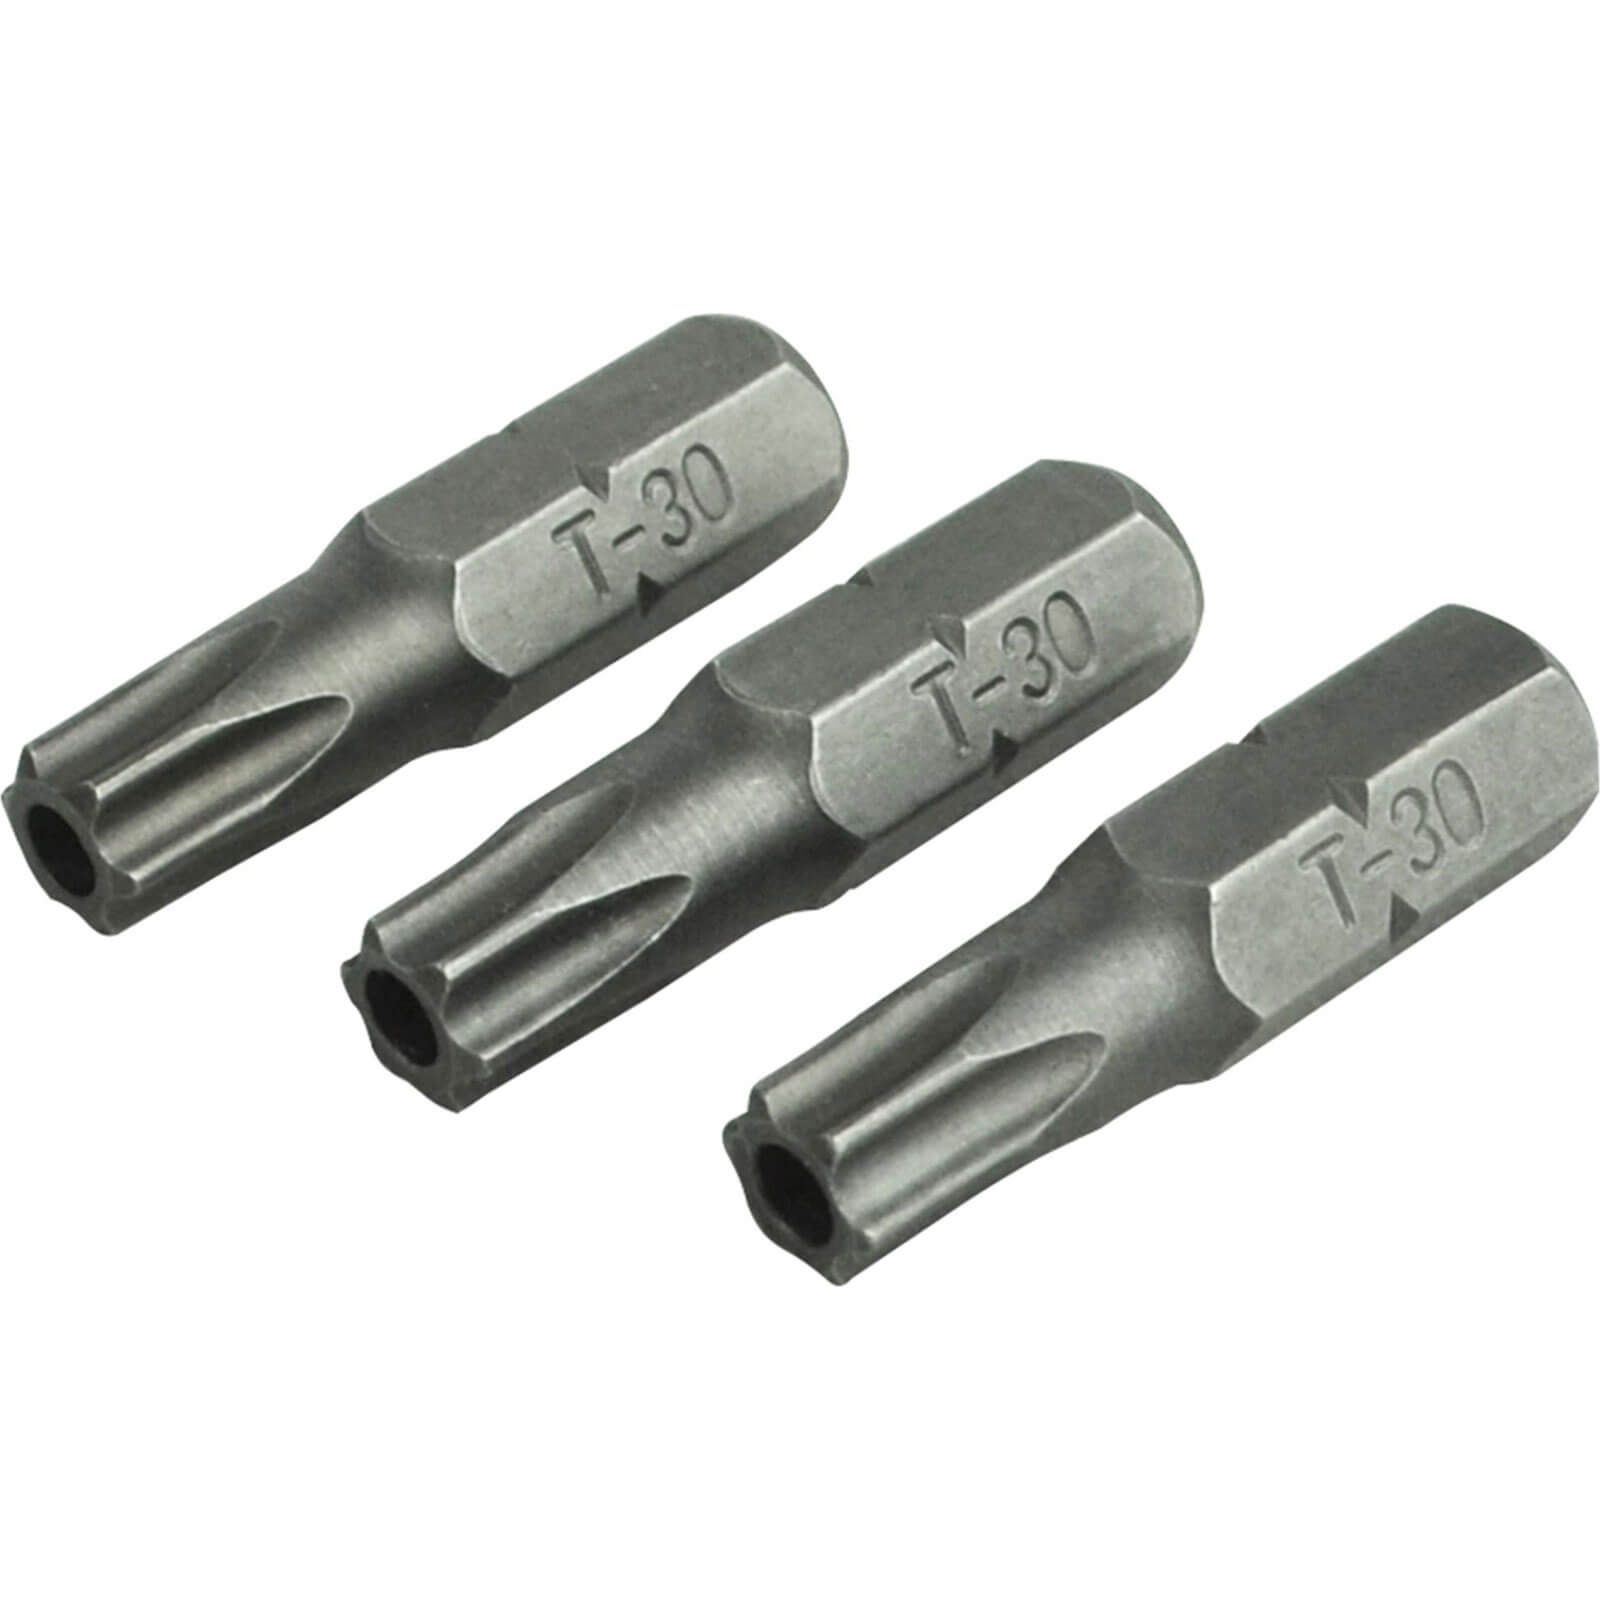 Image of Faithfull S2 Security Torx Screwdriver Bits T30 25mm Pack of 3